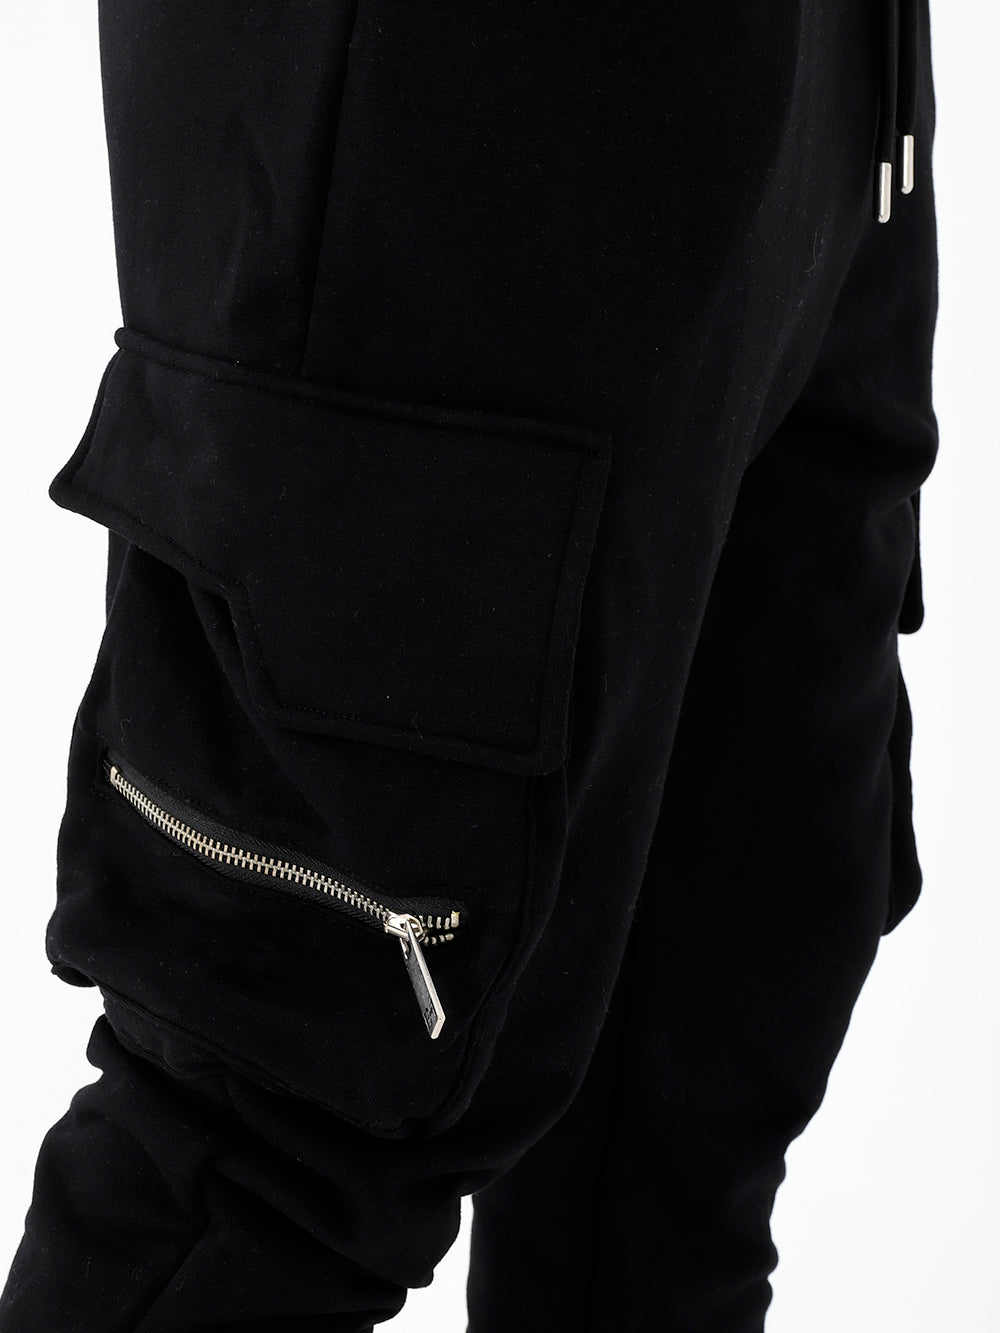 The comfort of Rambo joggers with zippered pockets.